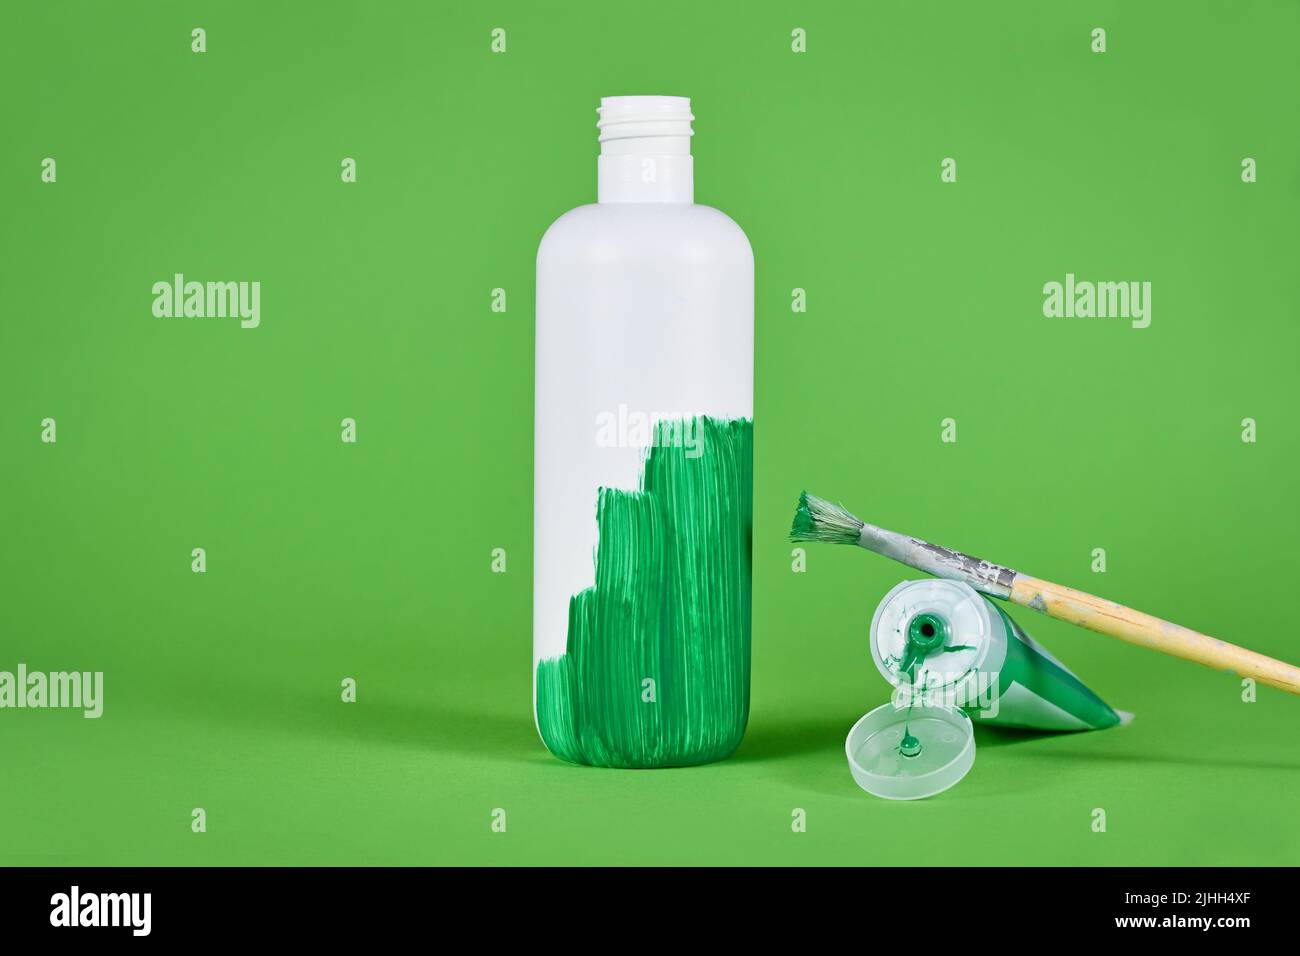 Greenwashing concept with white plastic bottle being painted green Stock Photo